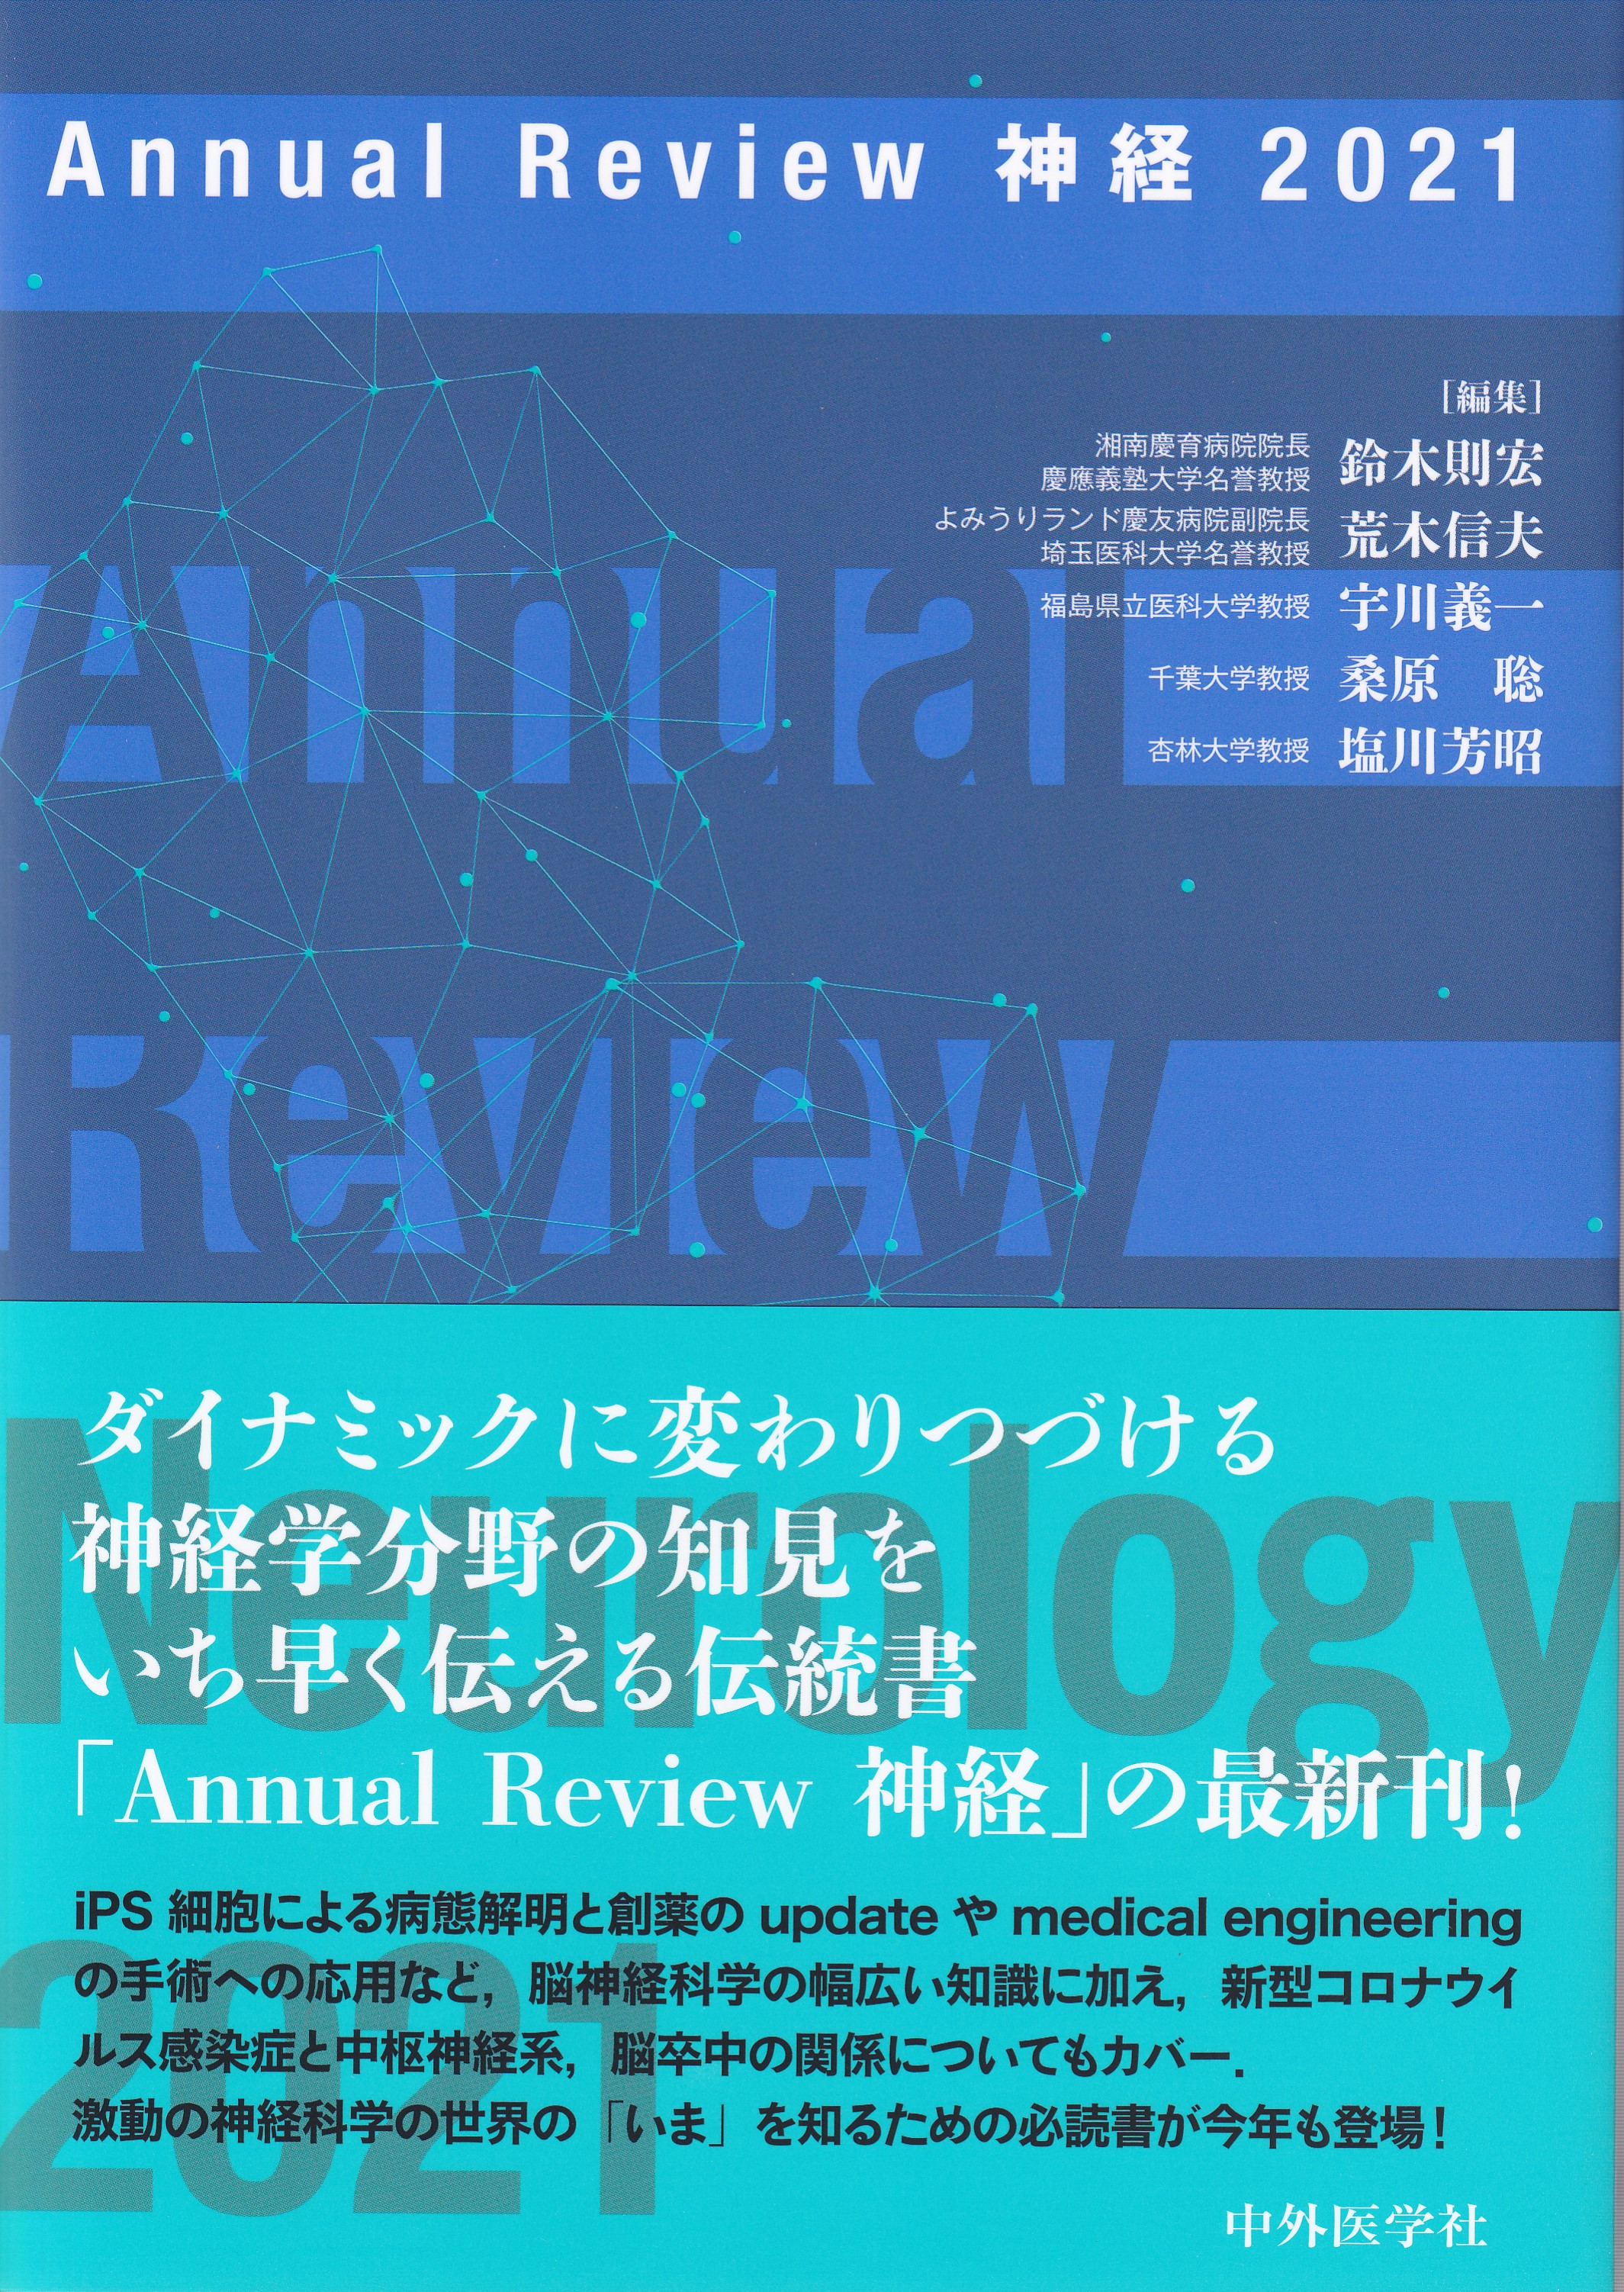 [A12135388]Annual Review神経 2021